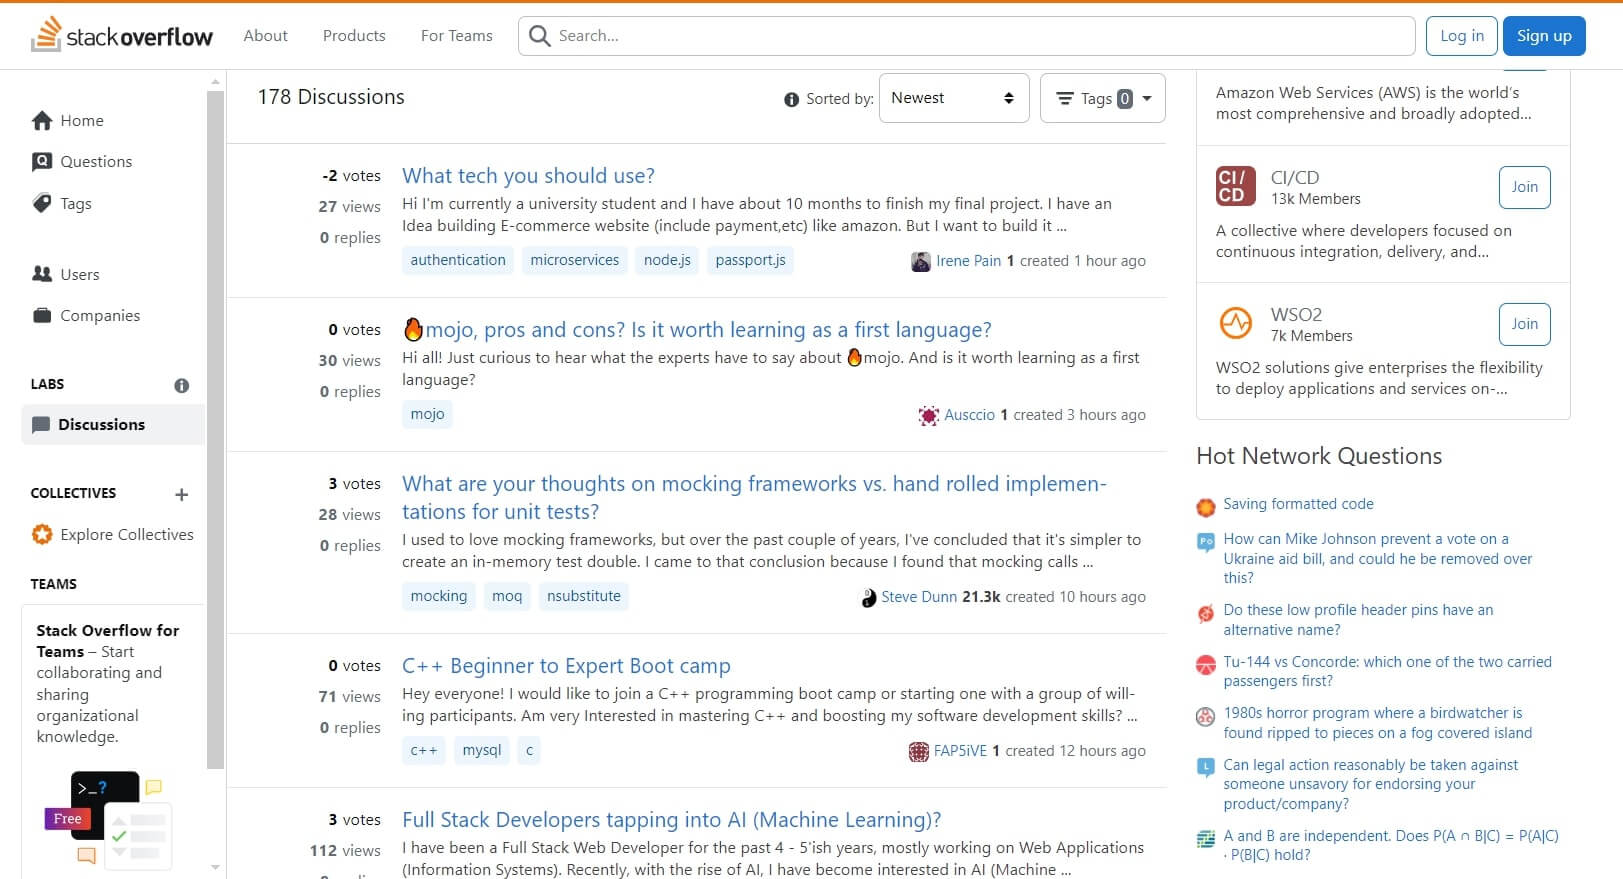 A screenshot of StackOverflow's community page.